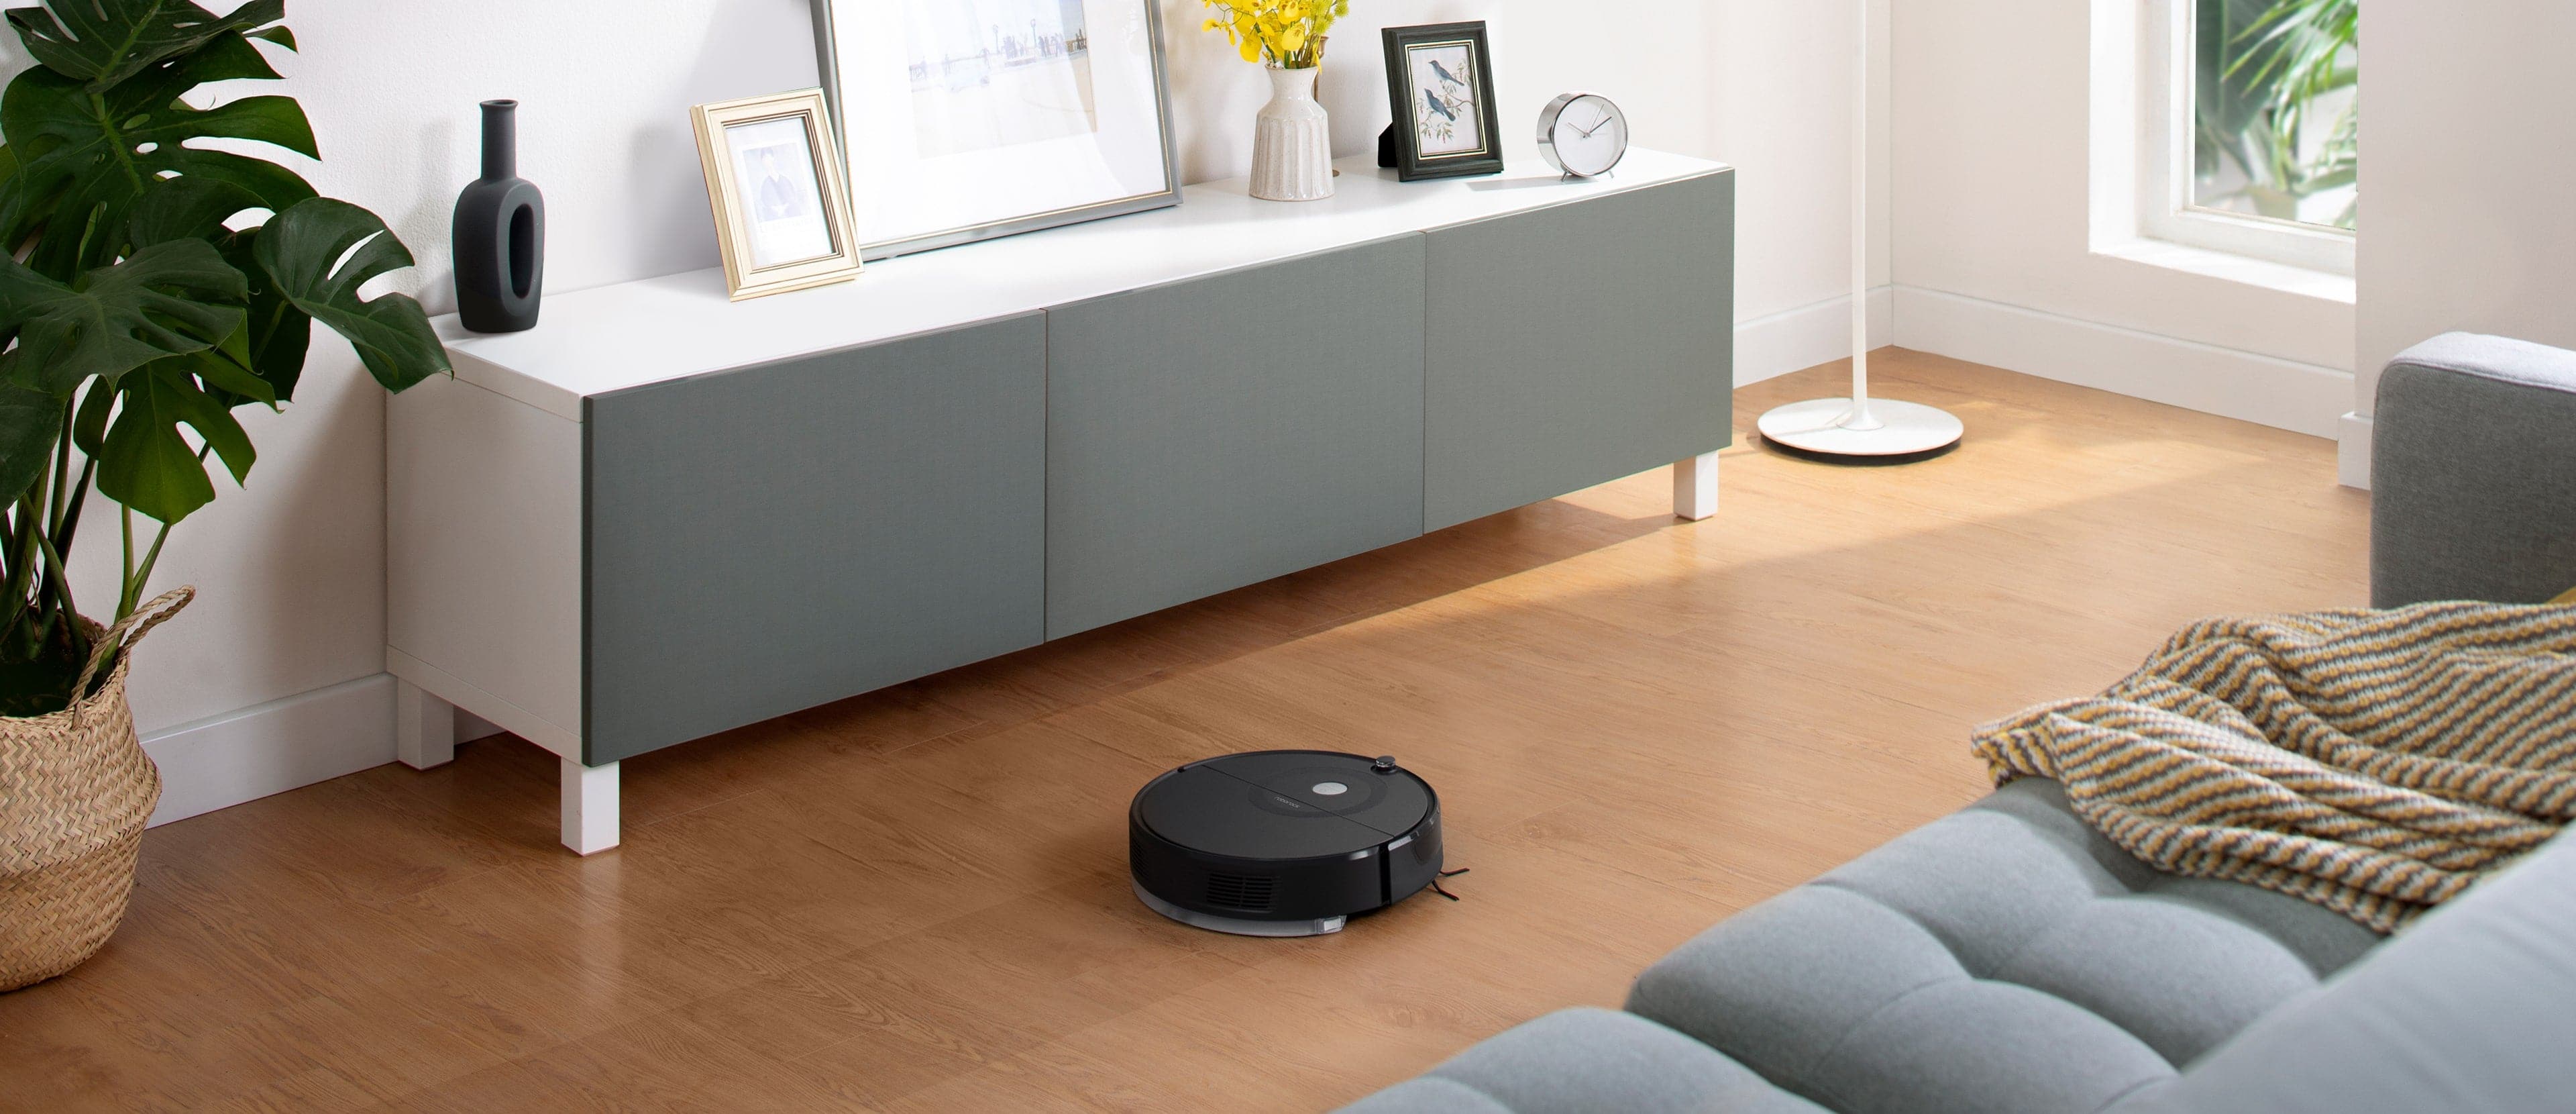 Roborock E5 Robot Vacuum Cleaner - Easy, Effective Home Cleaning